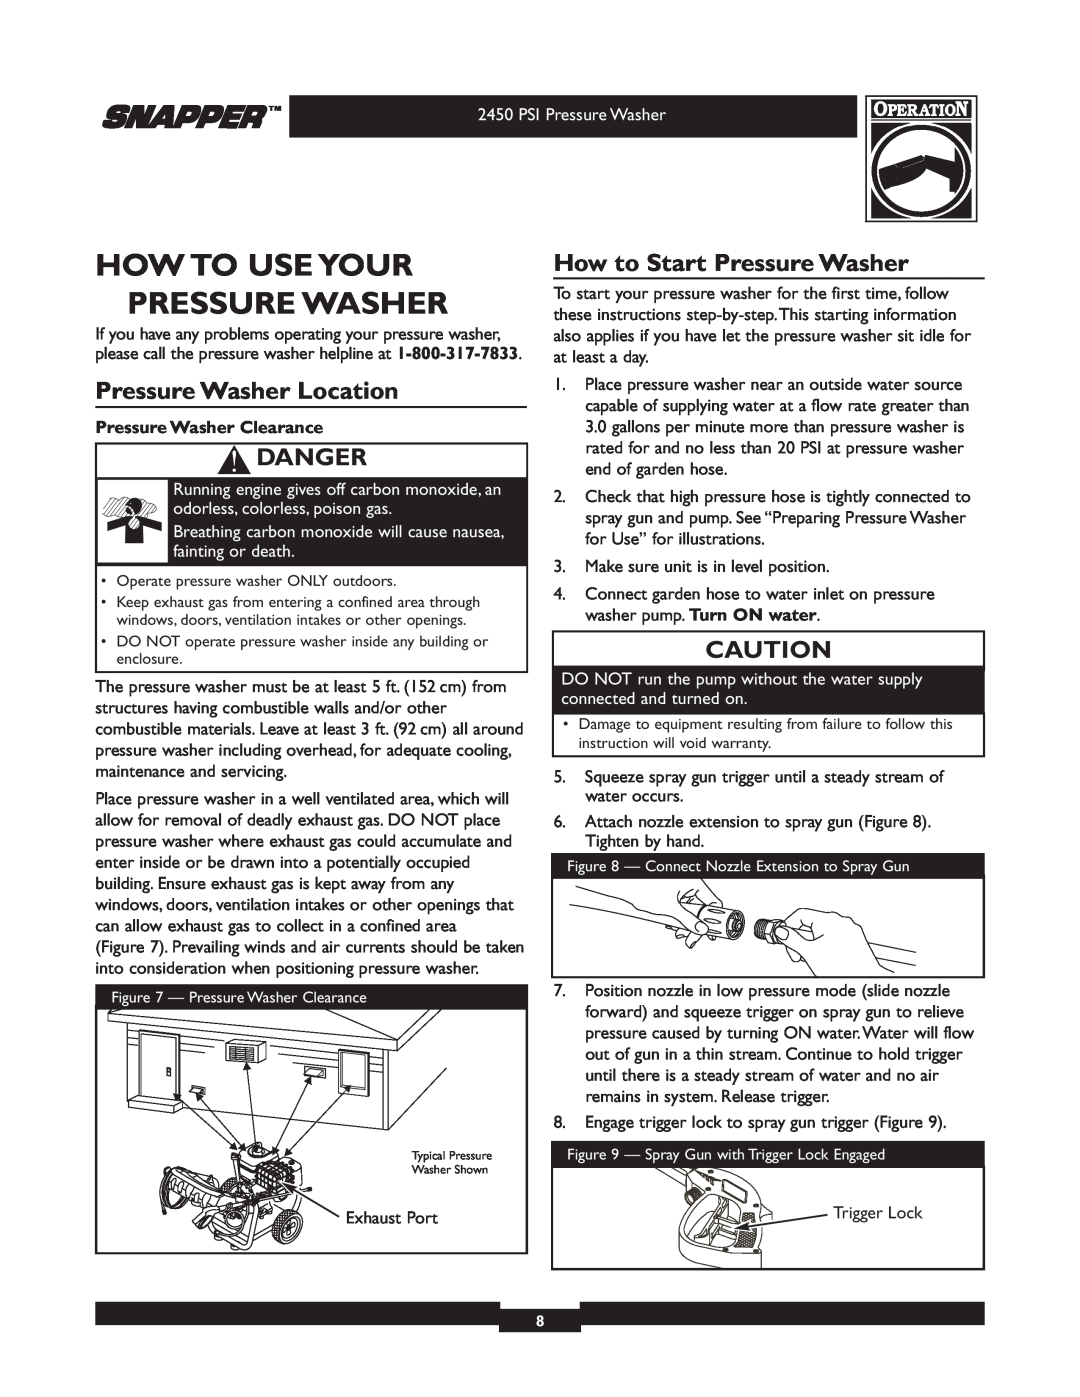 Snapper 020229 owner manual How To Use Your Pressure Washer, Pressure Washer Location, How to Start Pressure Washer, Danger 